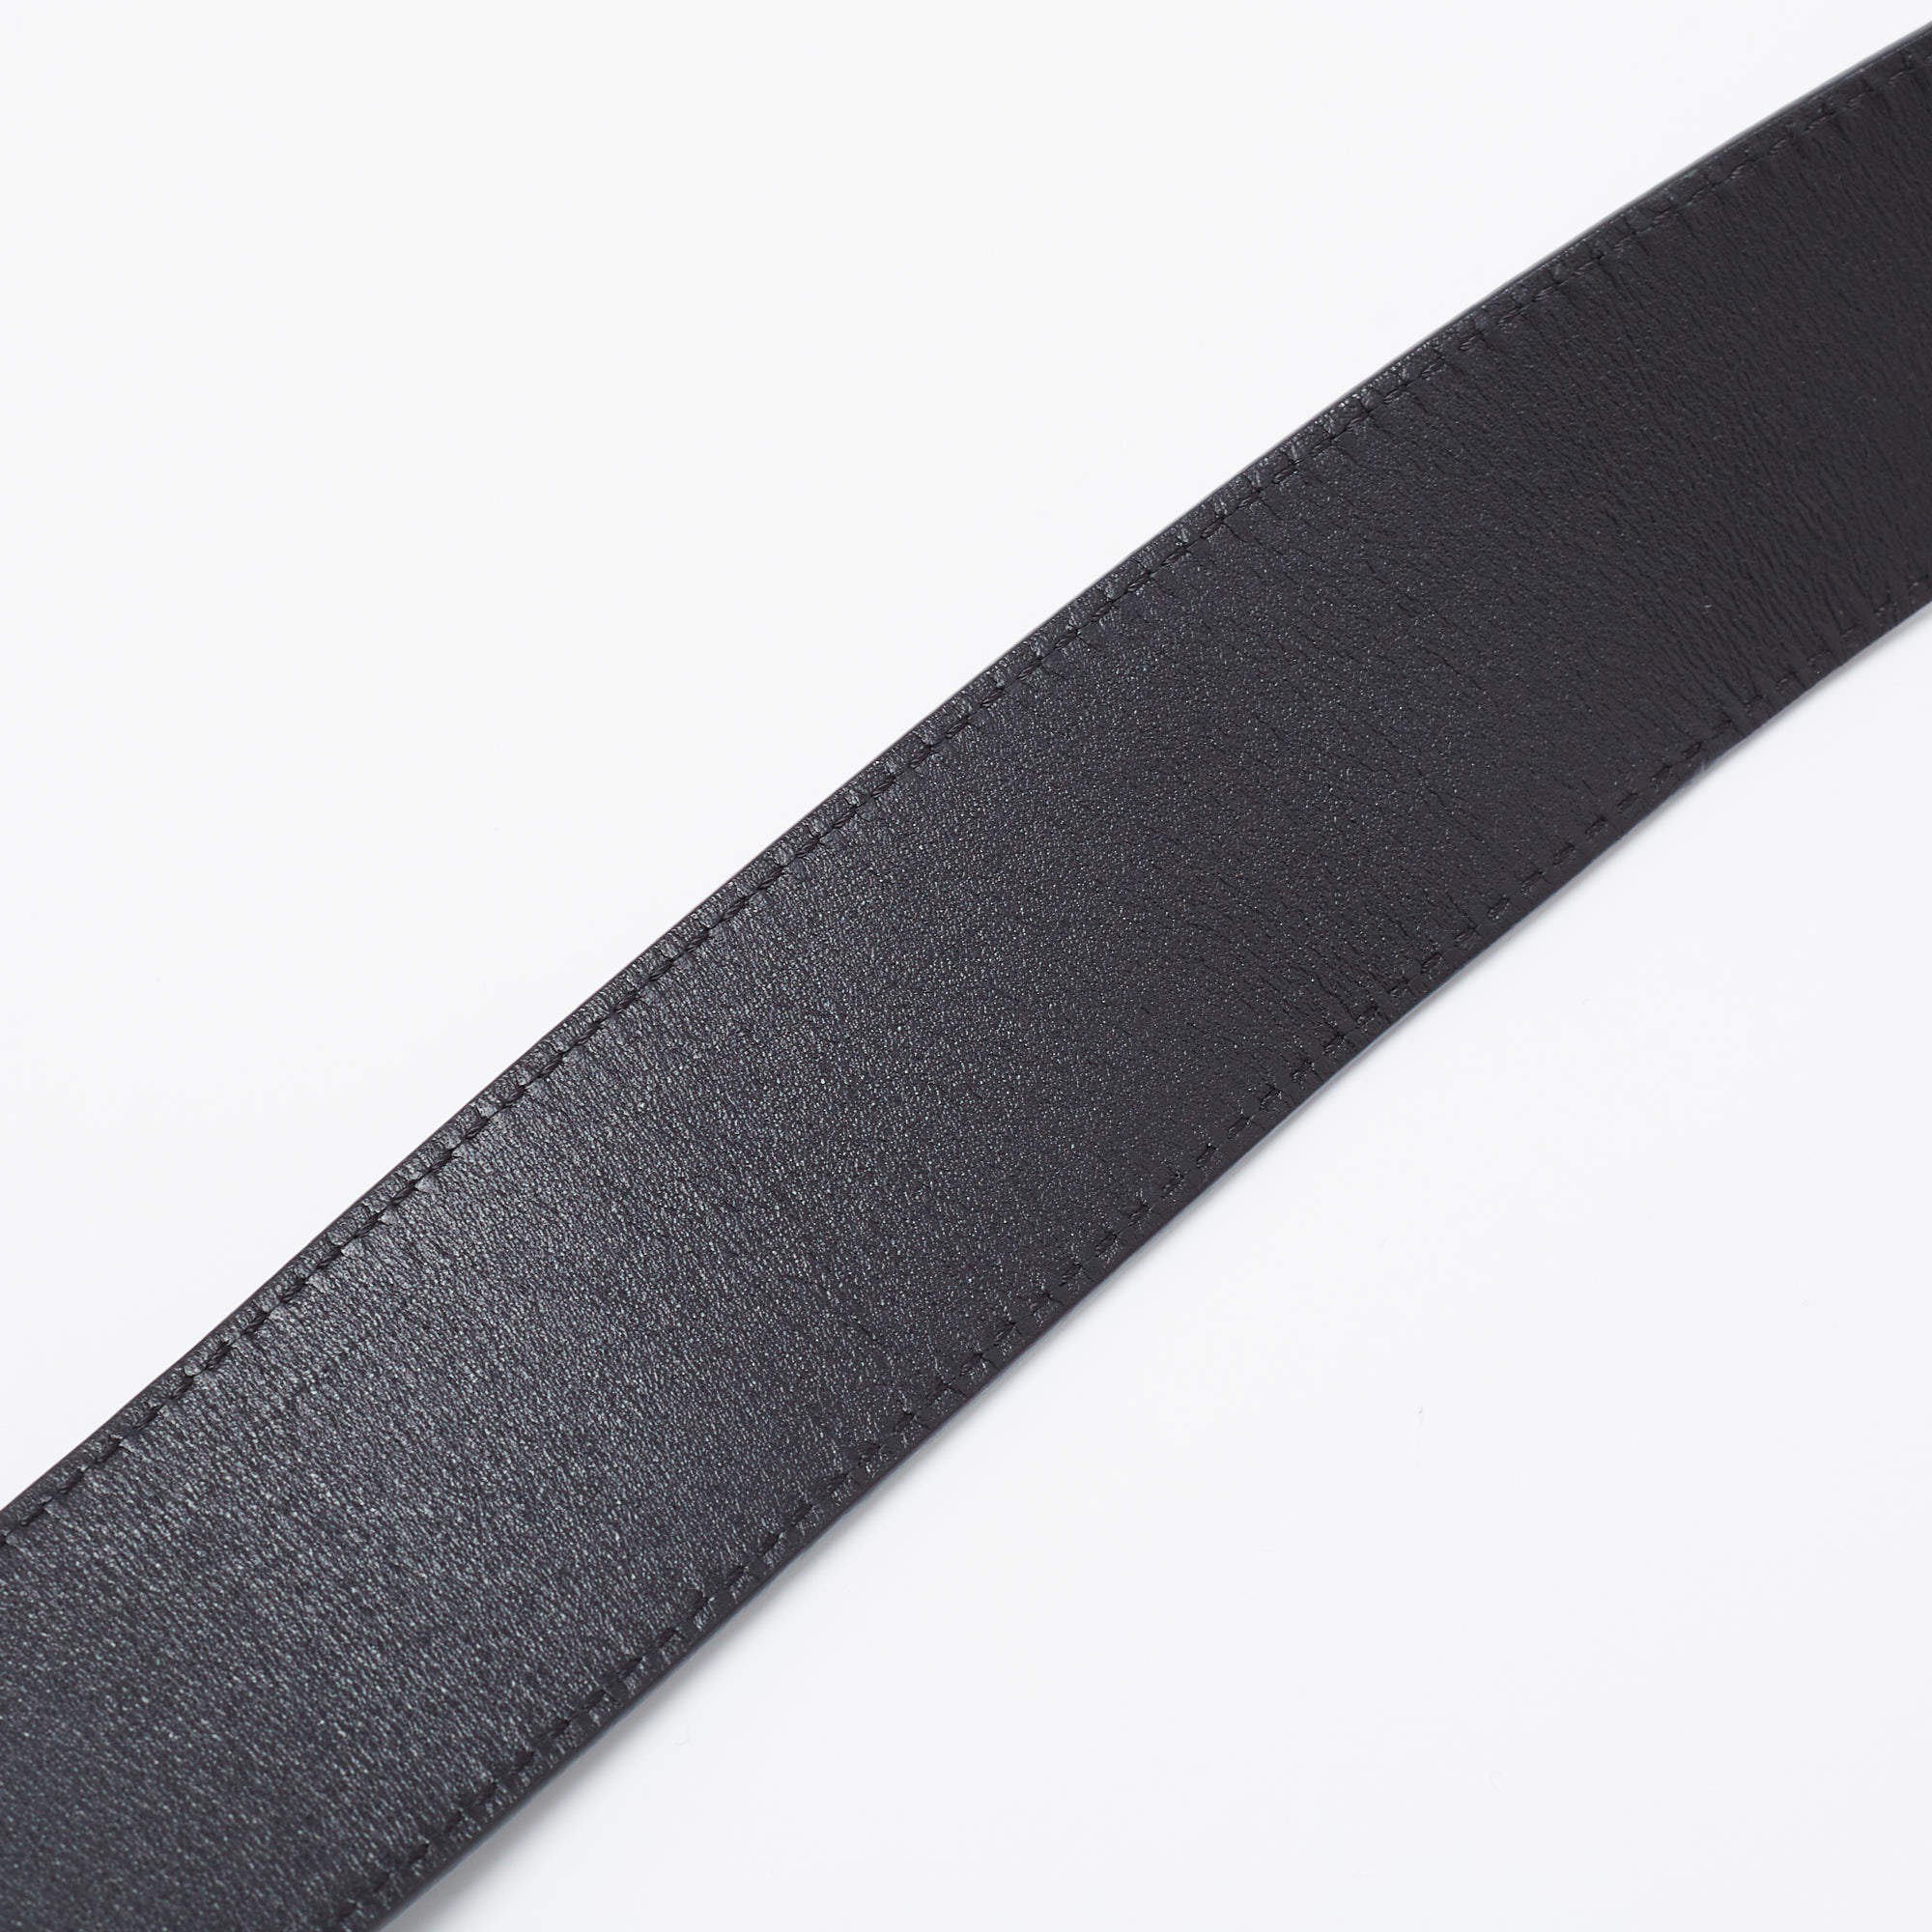 Initiales leather belt Louis Vuitton Black size 90 cm in Leather - 36780310